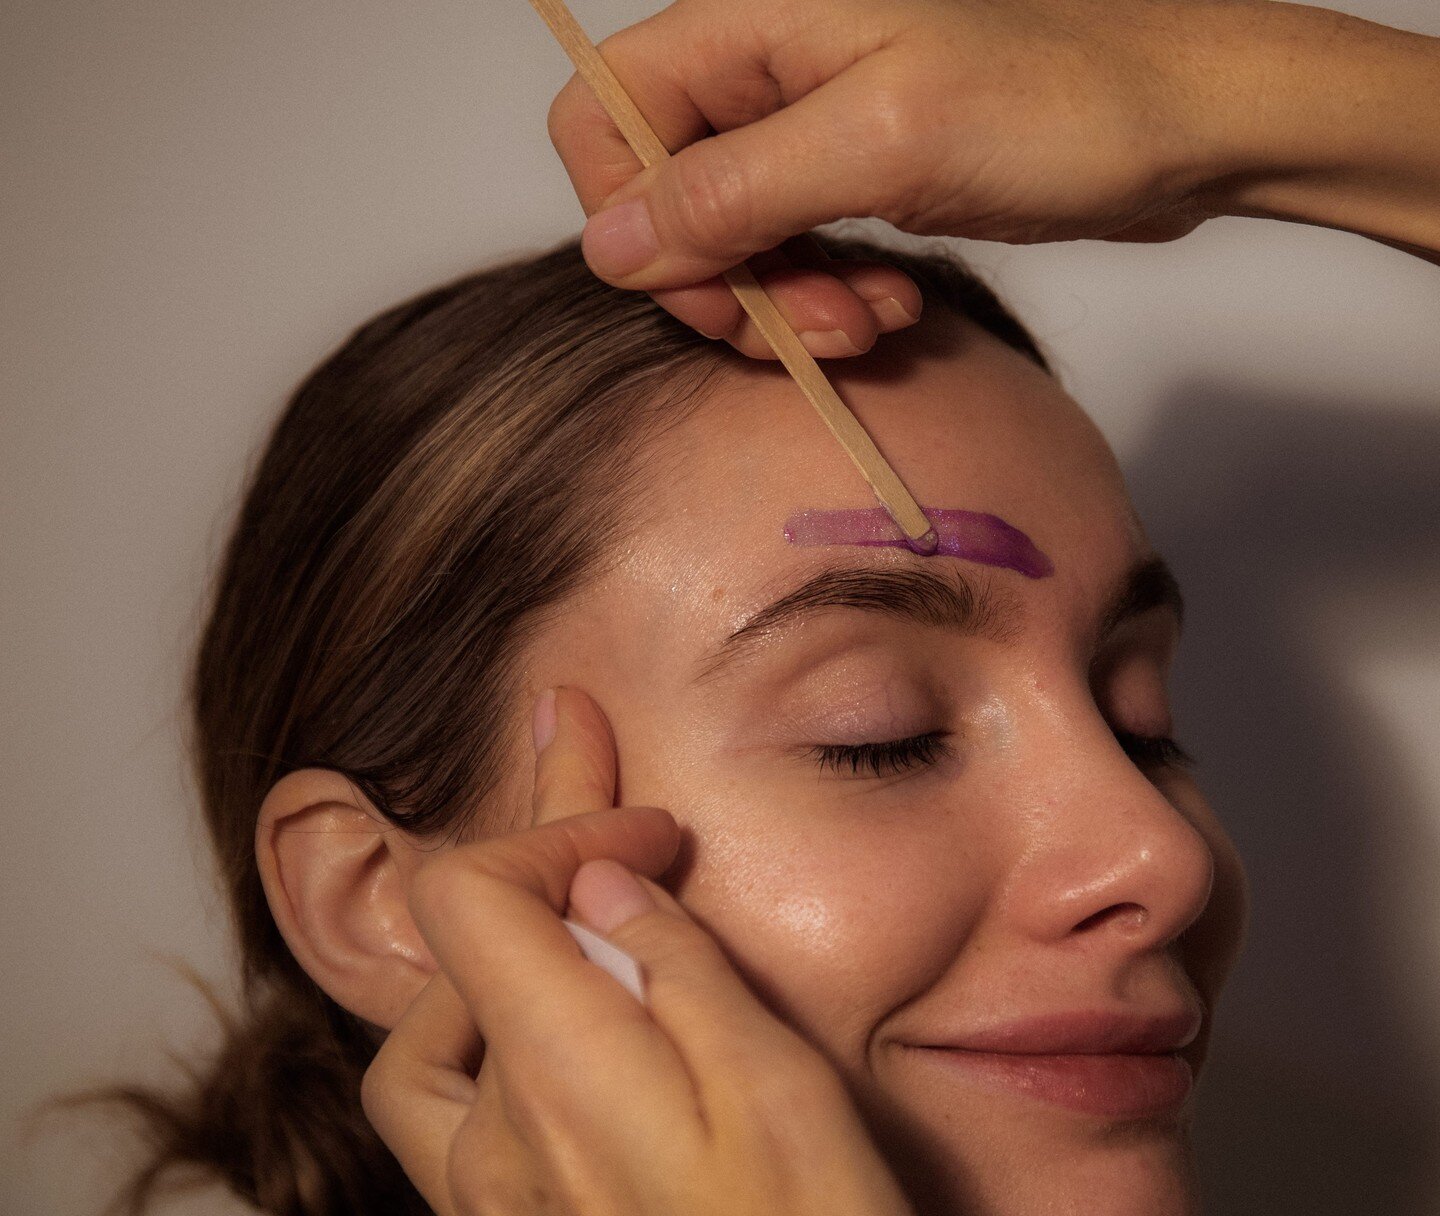 Did you know that brows that are too far apart can accentuate the nose? Or that brows with a softer arch can make the face appear shorter? 

They're not just eyebrows - your brow shape can actually impact the look of your entire face by drawing atten